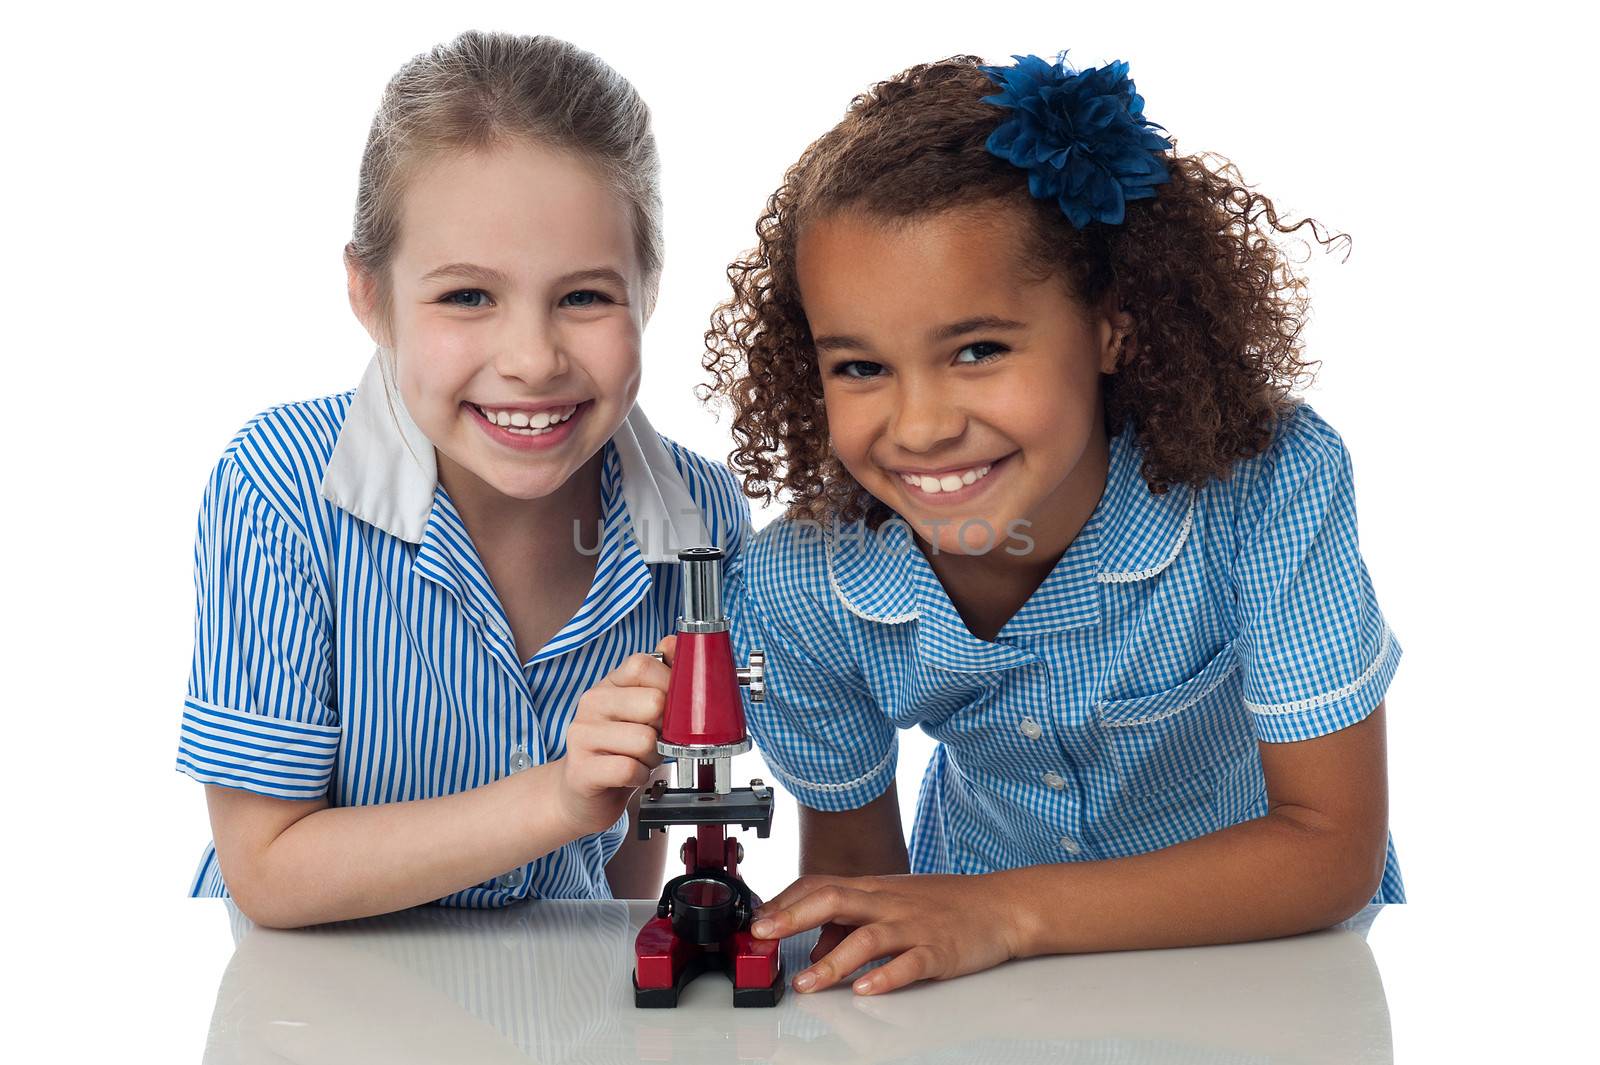 Kids in uniform playing with microscope by stockyimages